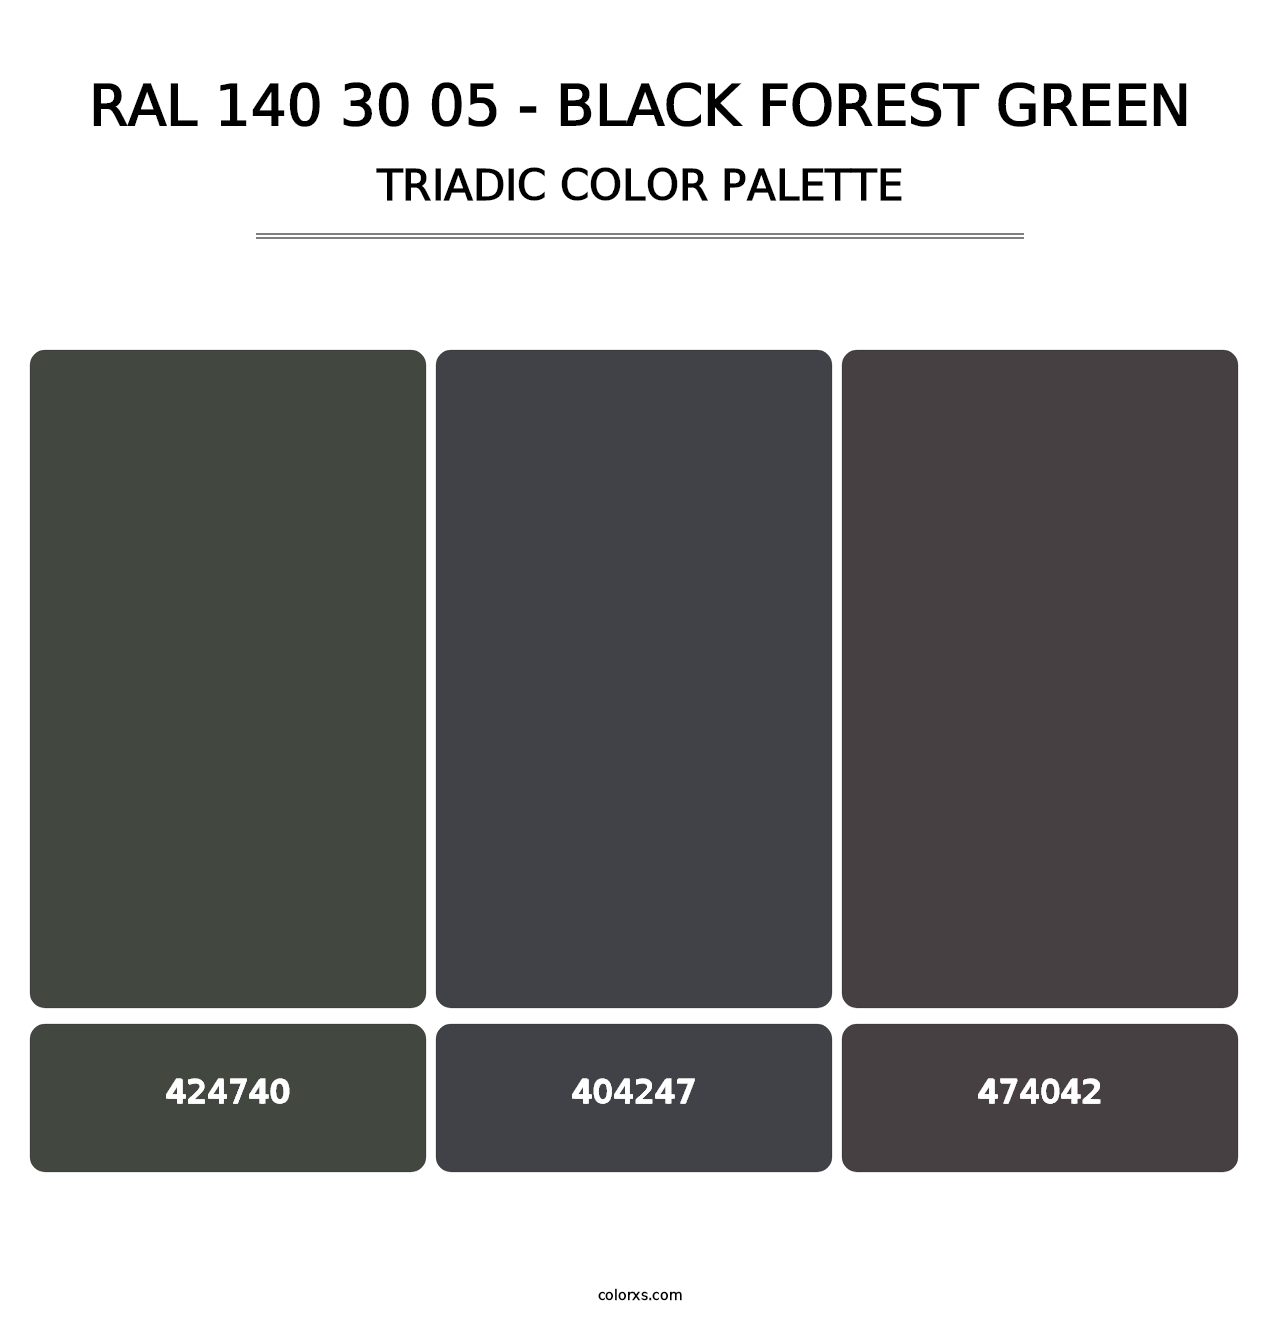 RAL 140 30 05 - Black Forest Green - Triadic Color Palette